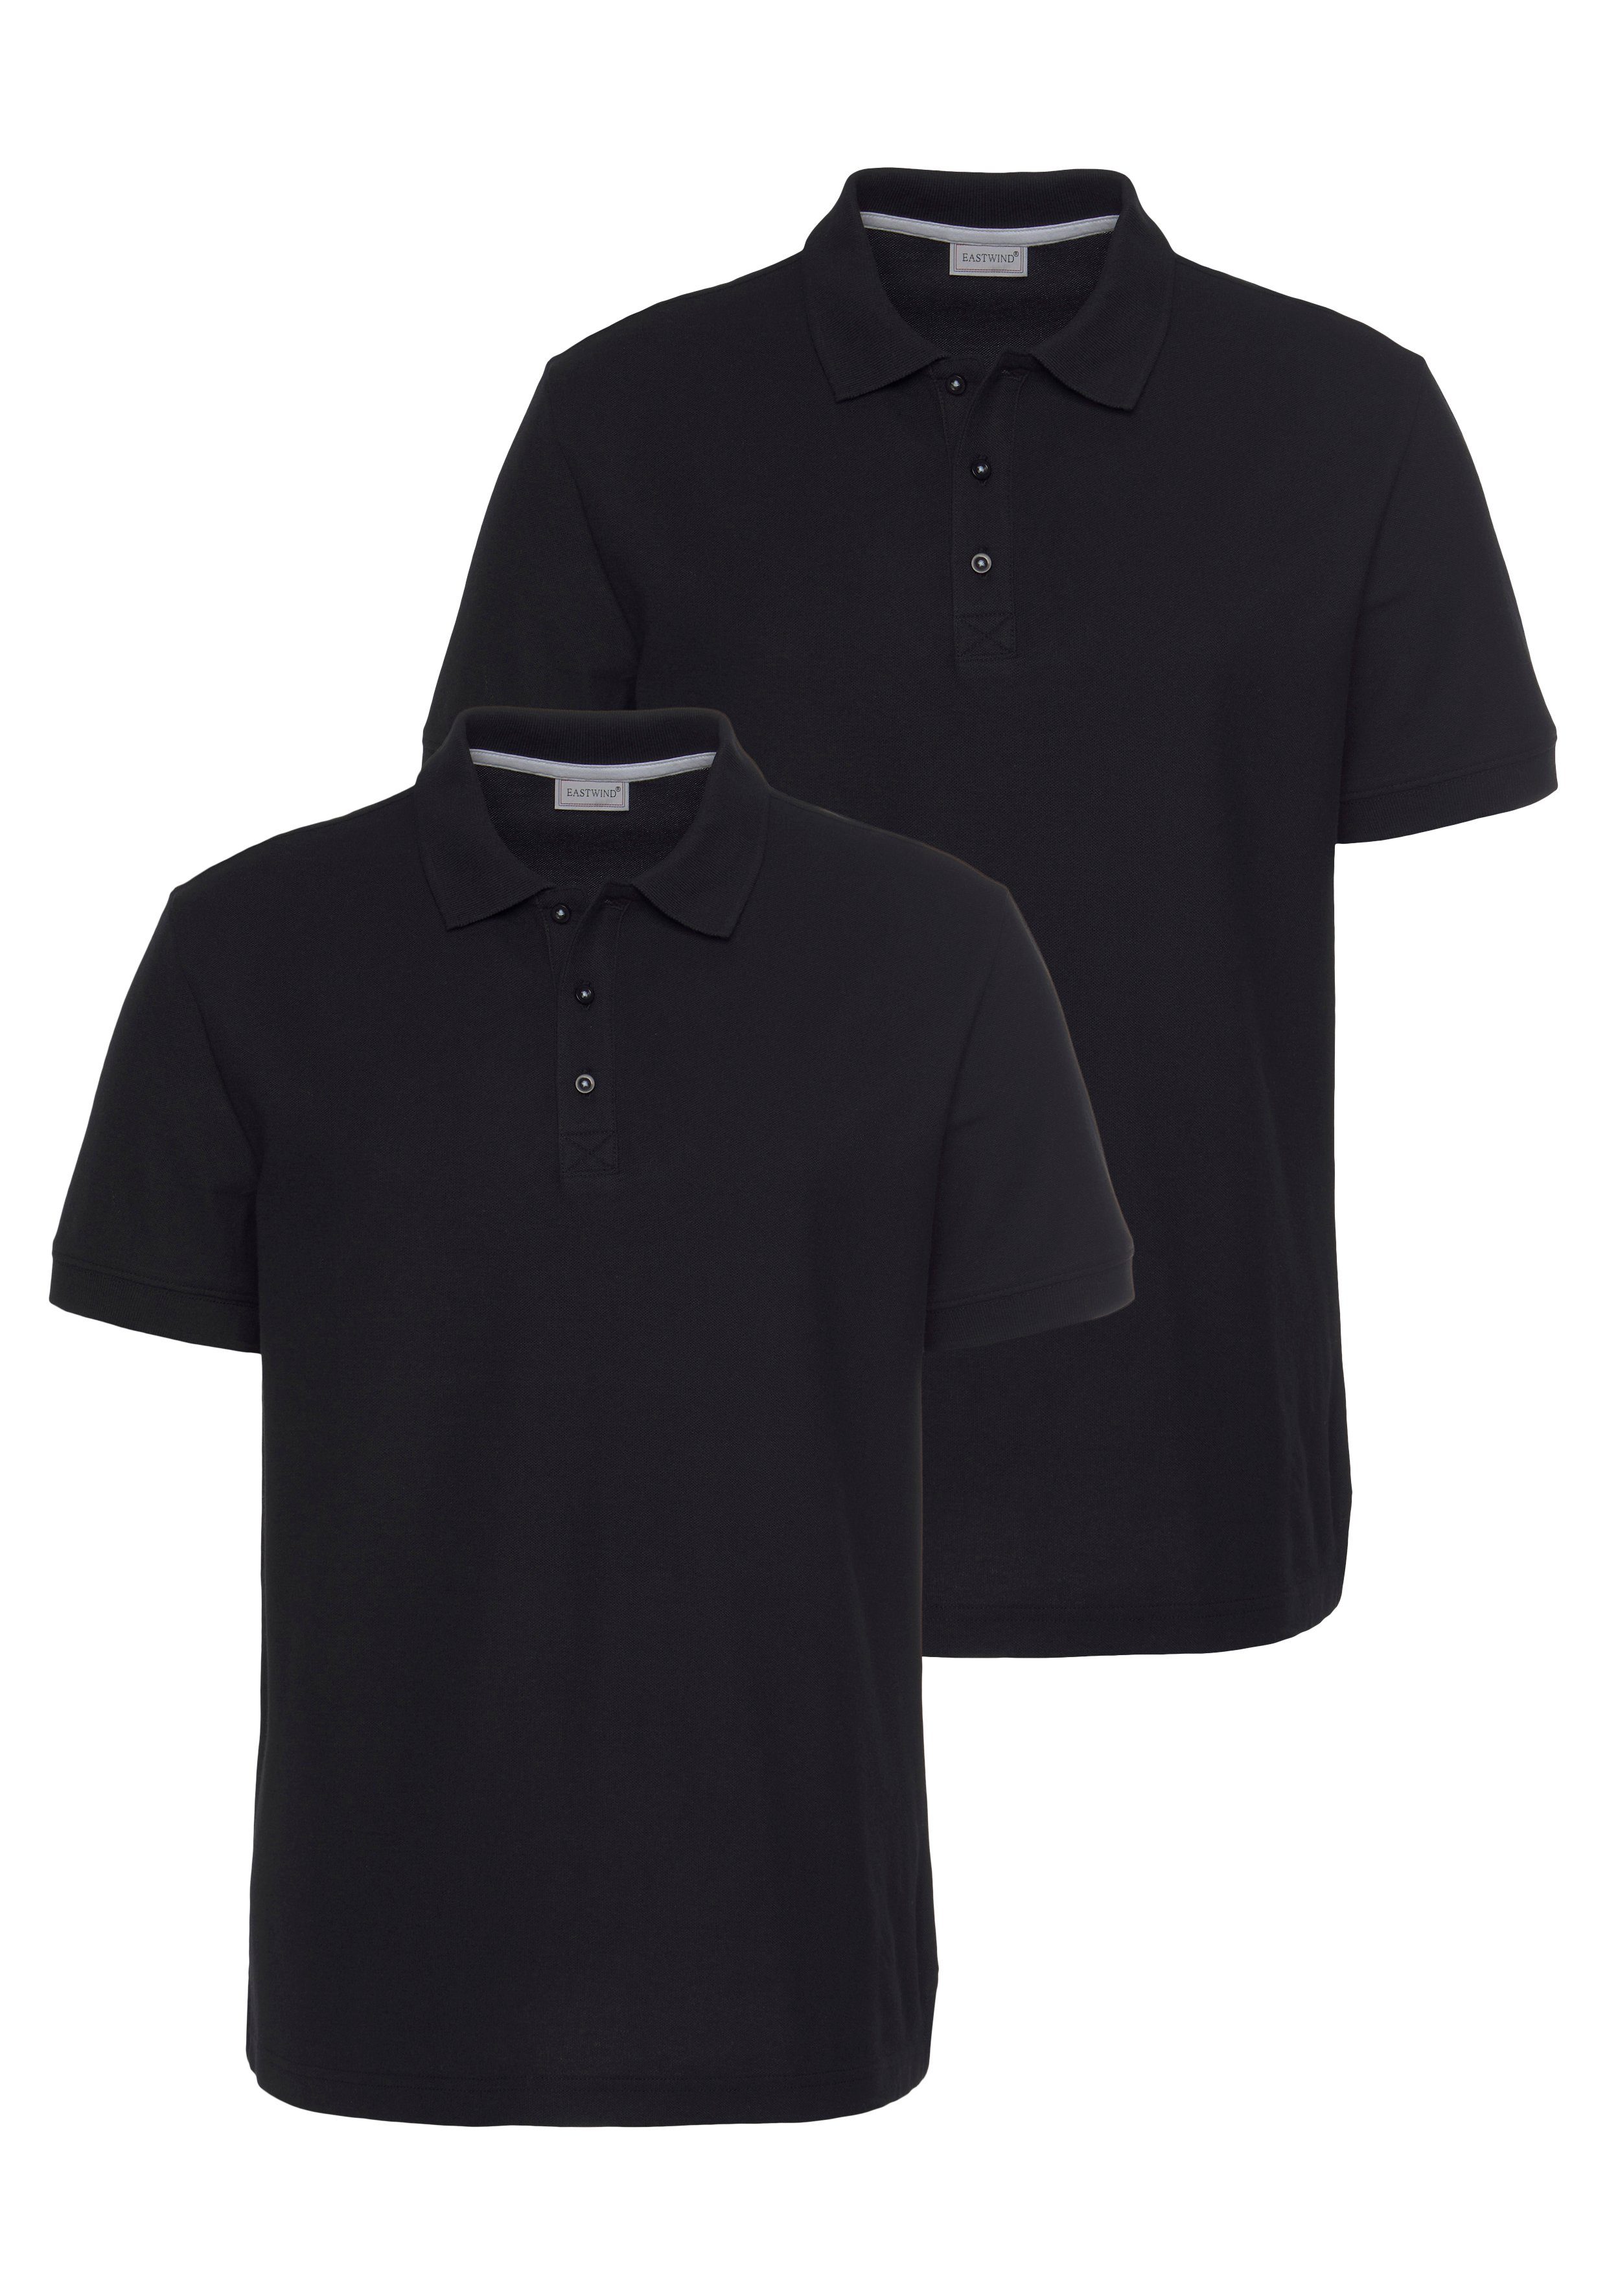 Eastwind Poloshirt Double Pack Polo, (2er-Pack) navy+white schwarz